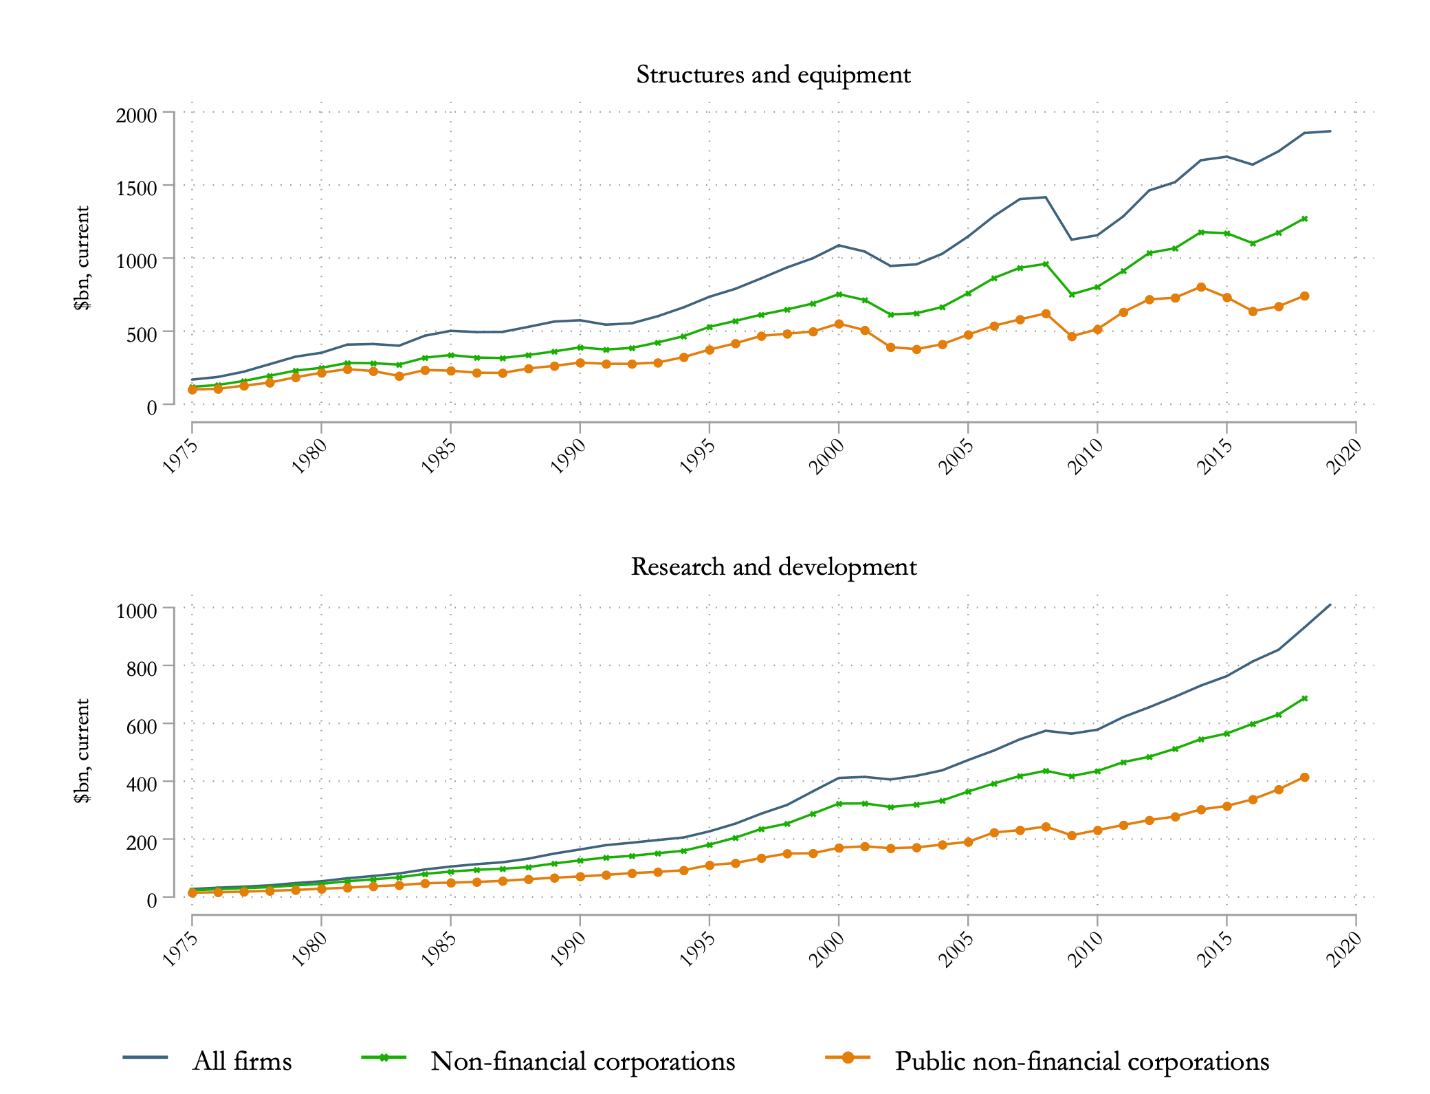 Figure 1 comprises two line charts. The top panel shows the evolution of investment in structures and equipment for all U.S. firms, for the subset of nonfinancial corporations and for the subset of public nonfinancial corporations from 1975 to 2019. Generally, the three lines grow roughly in parallel fashion. The bottom panel shows the evolution of investment in research and development for all U.S. firms, for nonfinancial corporations, and for public nonfinancial corporations. Generally, the three lines grow roughly in parallel fashion. 